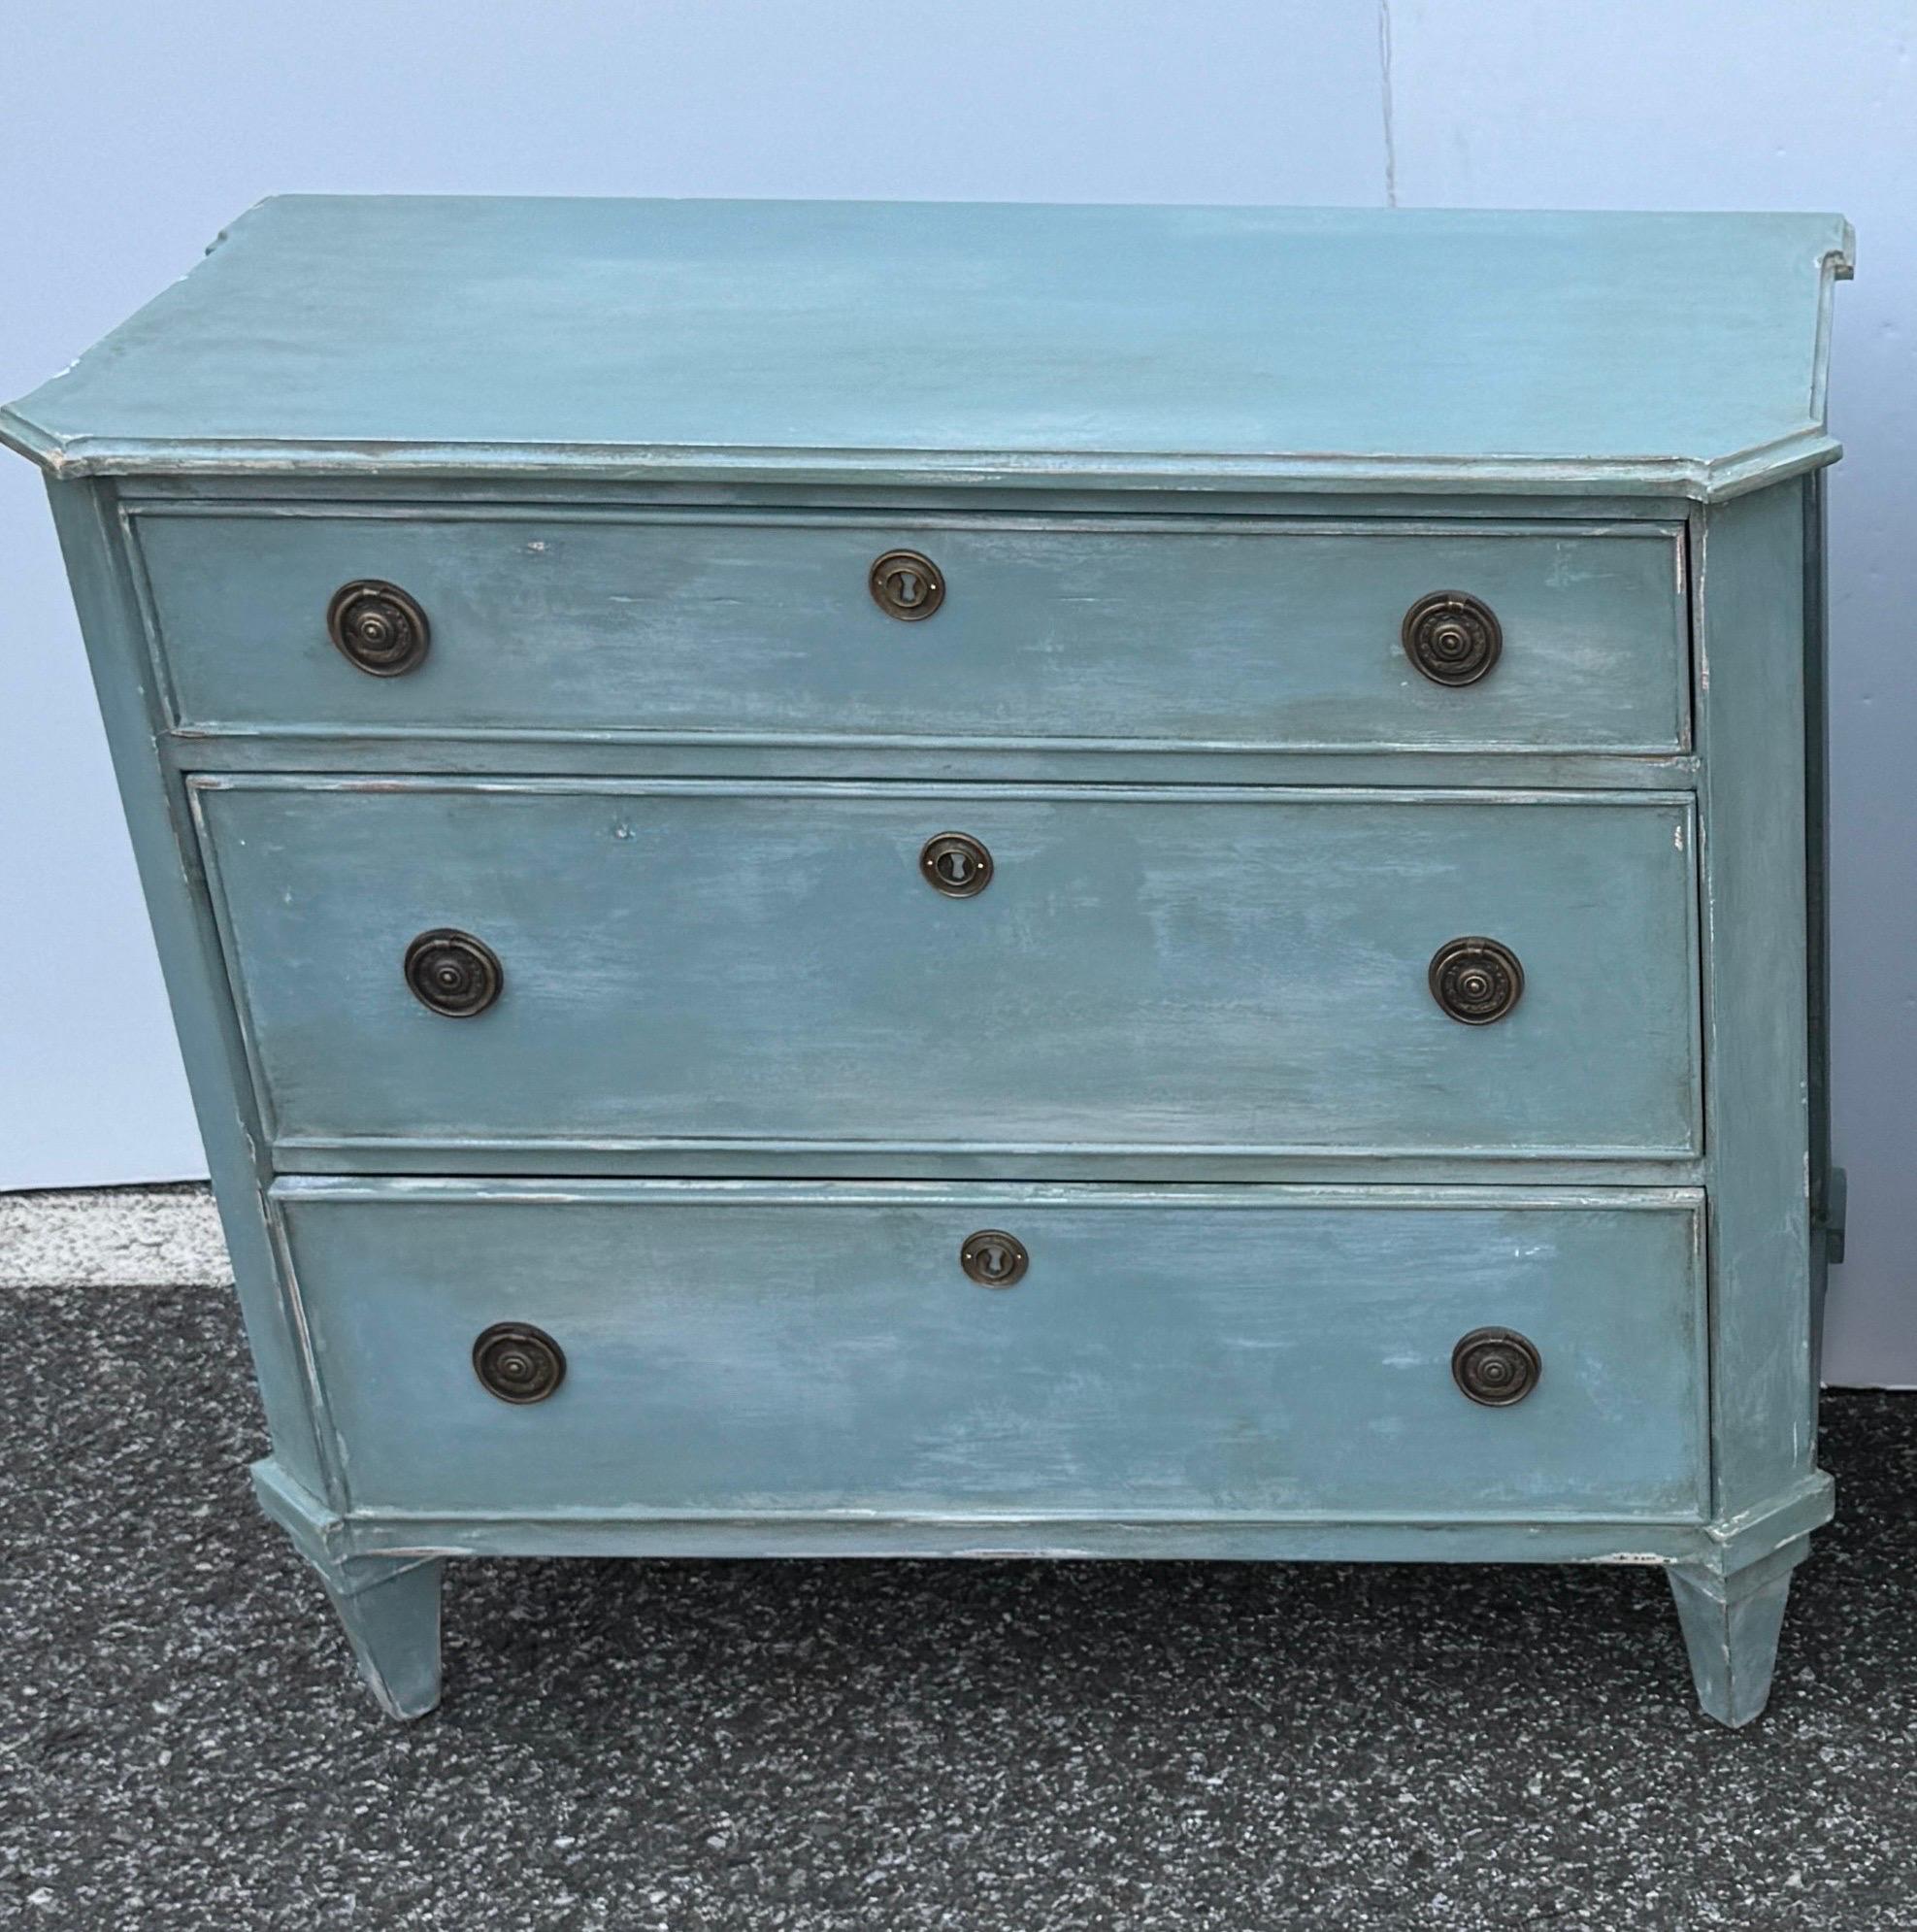 Blue Painted Swedish Gustavian Style 3 Drawer Chest Bureau.

This three drawer bureau is based on an 18th Century Gustavian antique chest. The chest is handmade and hand painted with solid wood legs and frame. The detailing is impeccable and